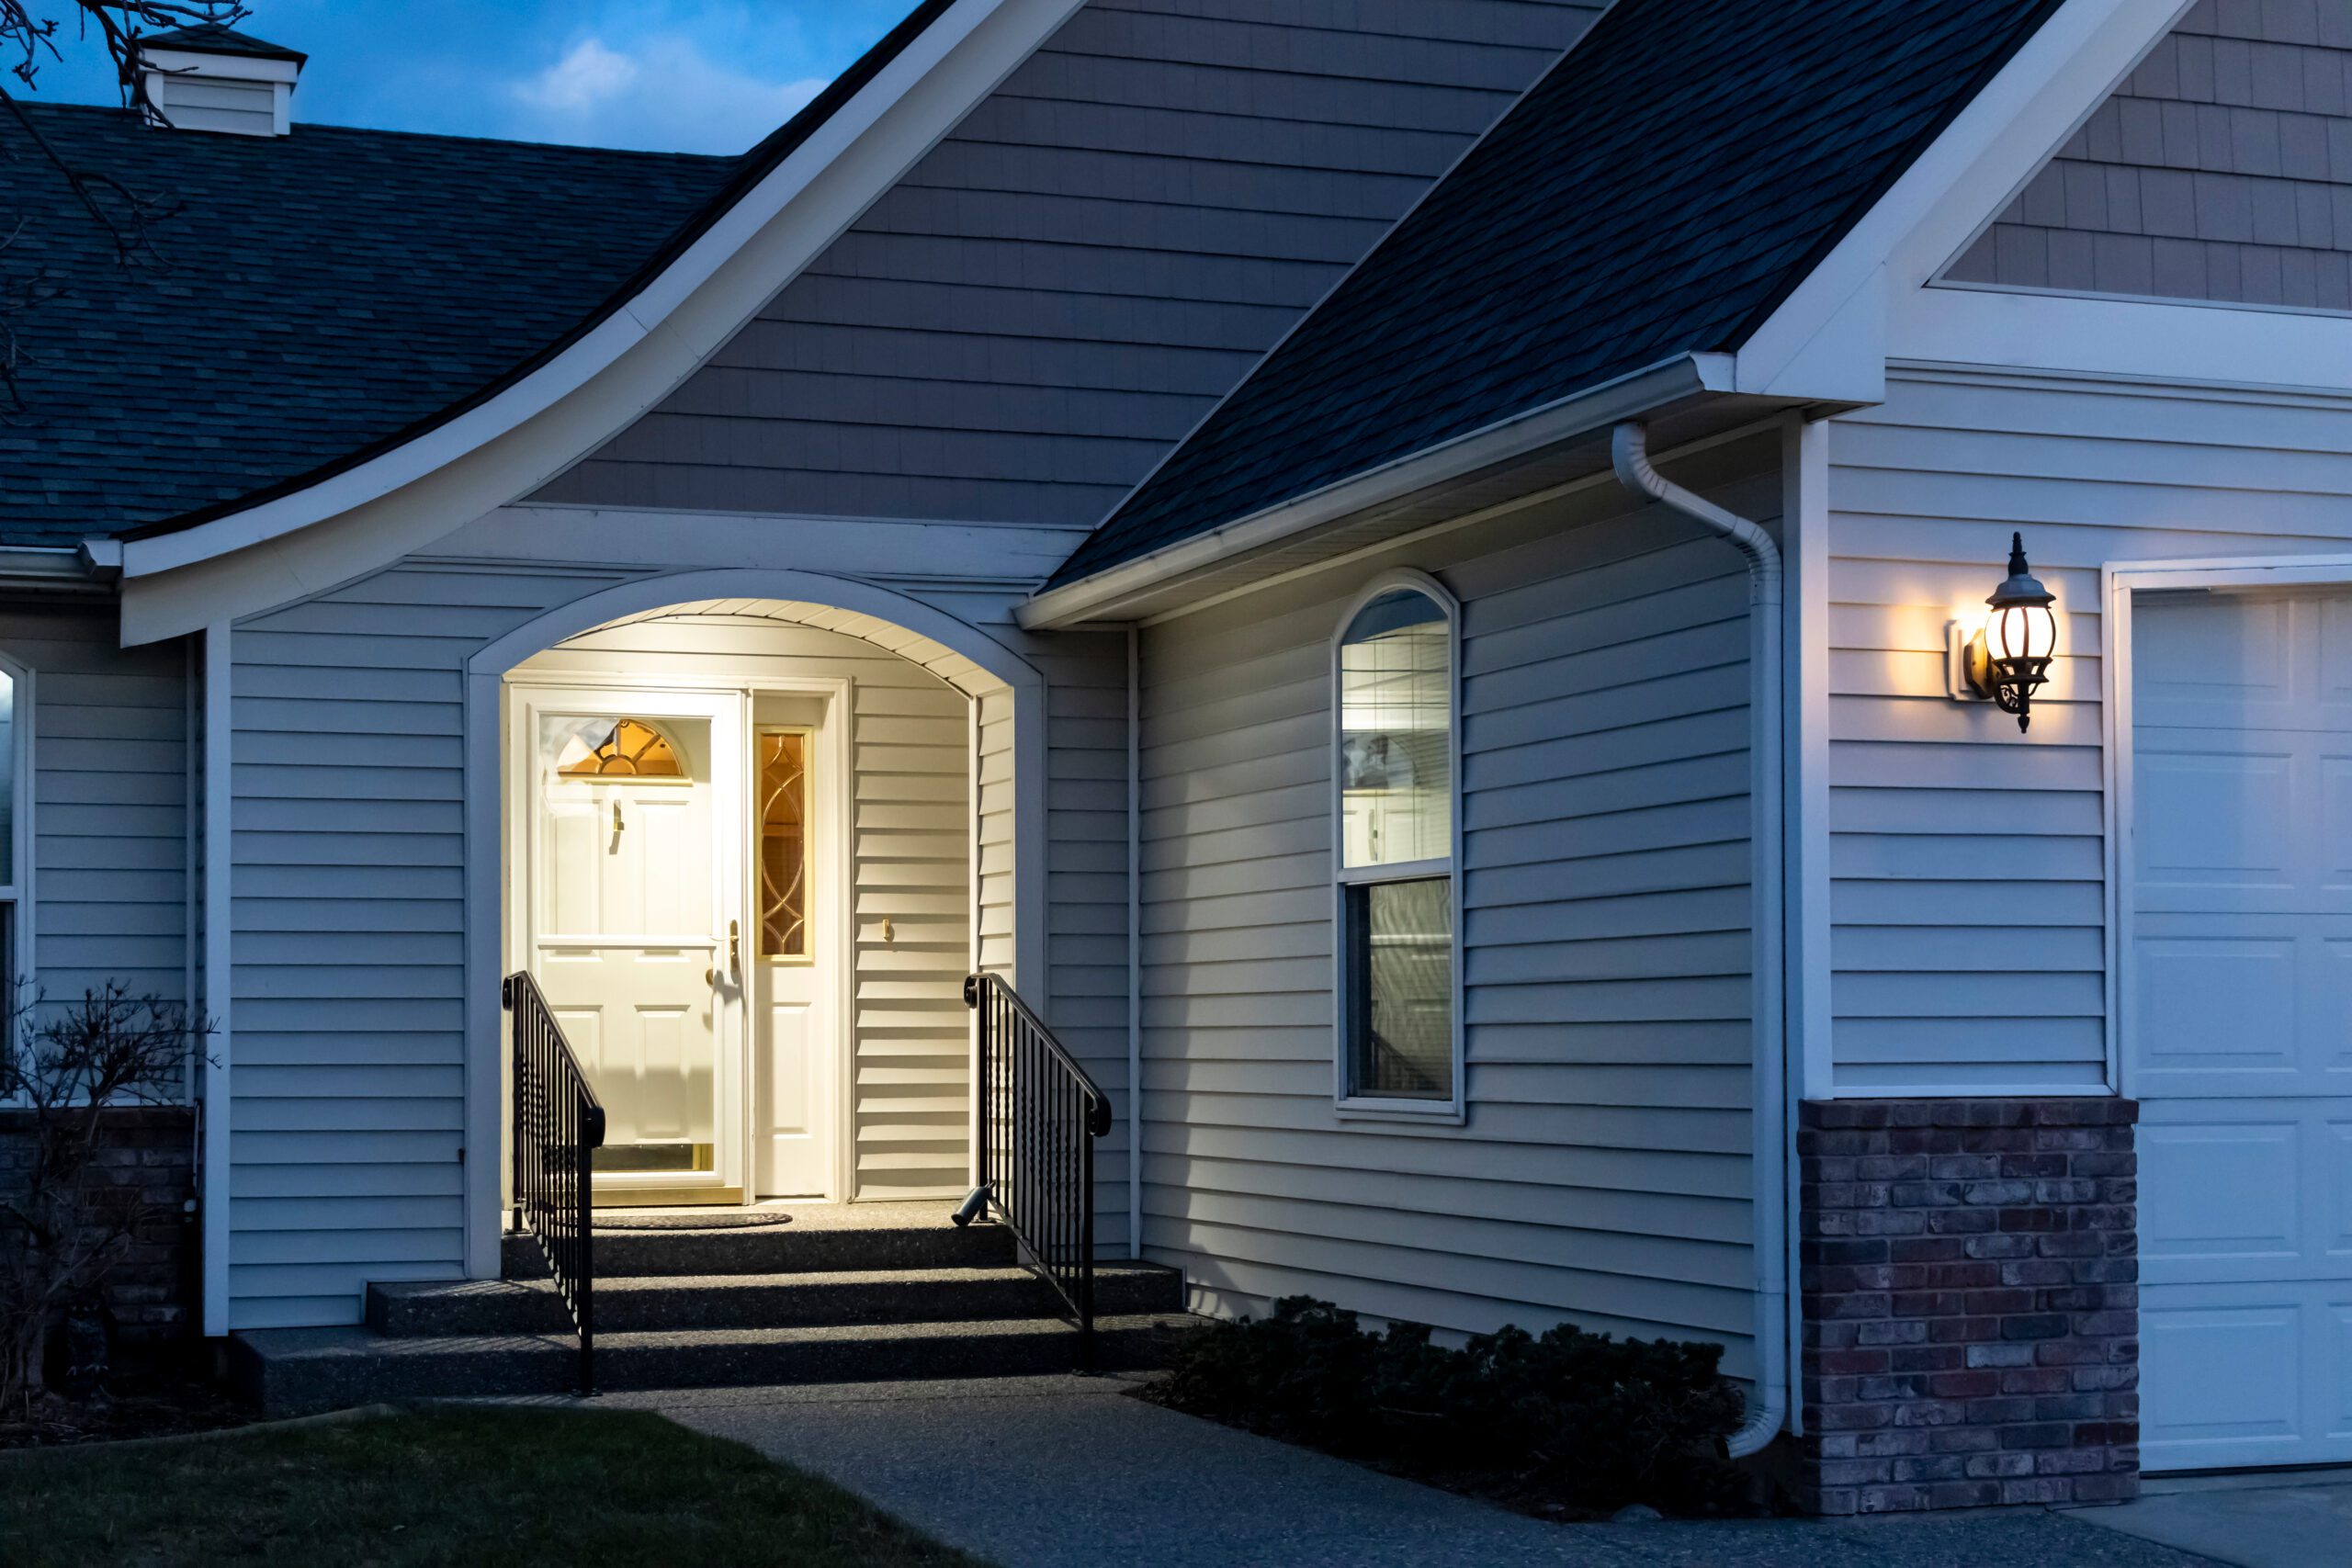 Porch light illuminates a secure home at dusk, symbolizing safety and strategic lighting for enhanced security.